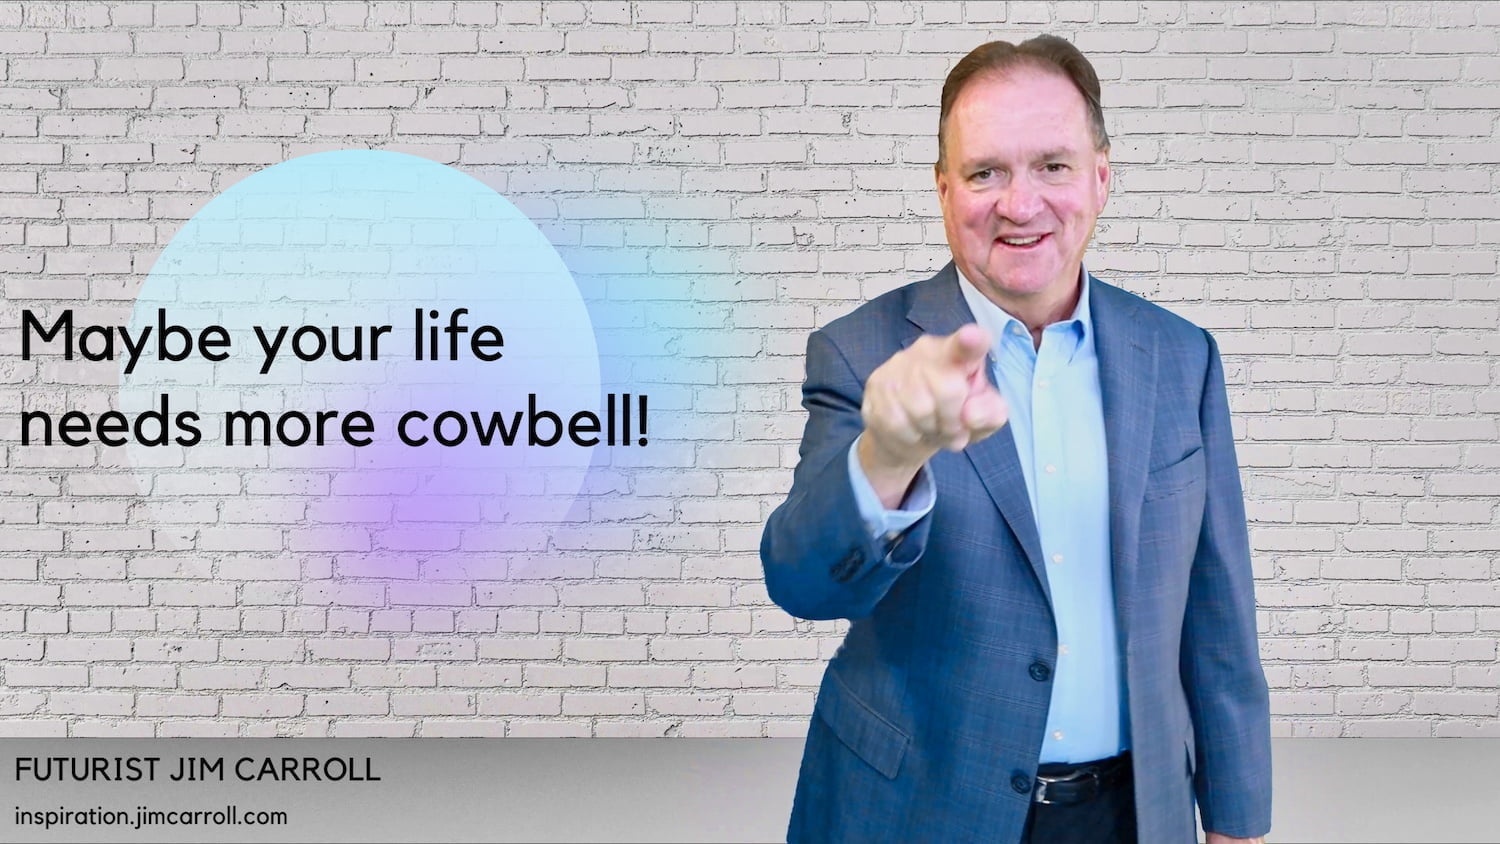 Daily Inspiration: "Maybe your life needs more cowbell!"